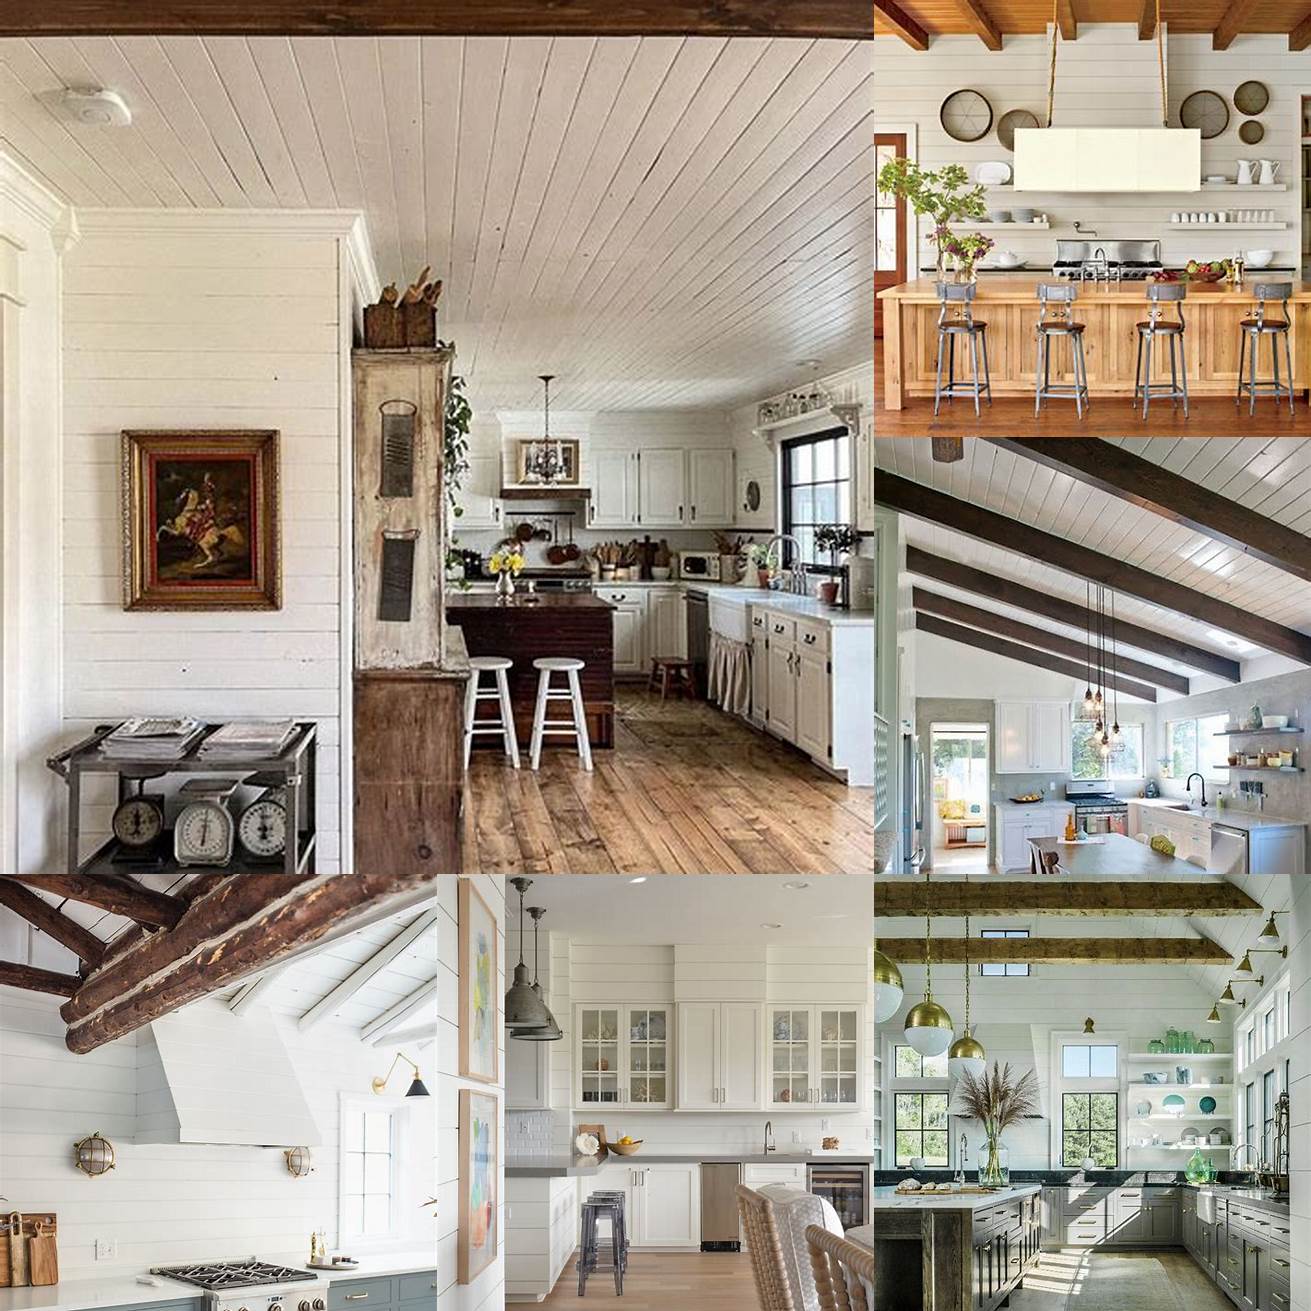 Farmhouse-style kitchen with white shiplap walls exposed ceiling beams and vintage lighting fixtures The open shelving and natural wood countertops add warmth and texture to the space